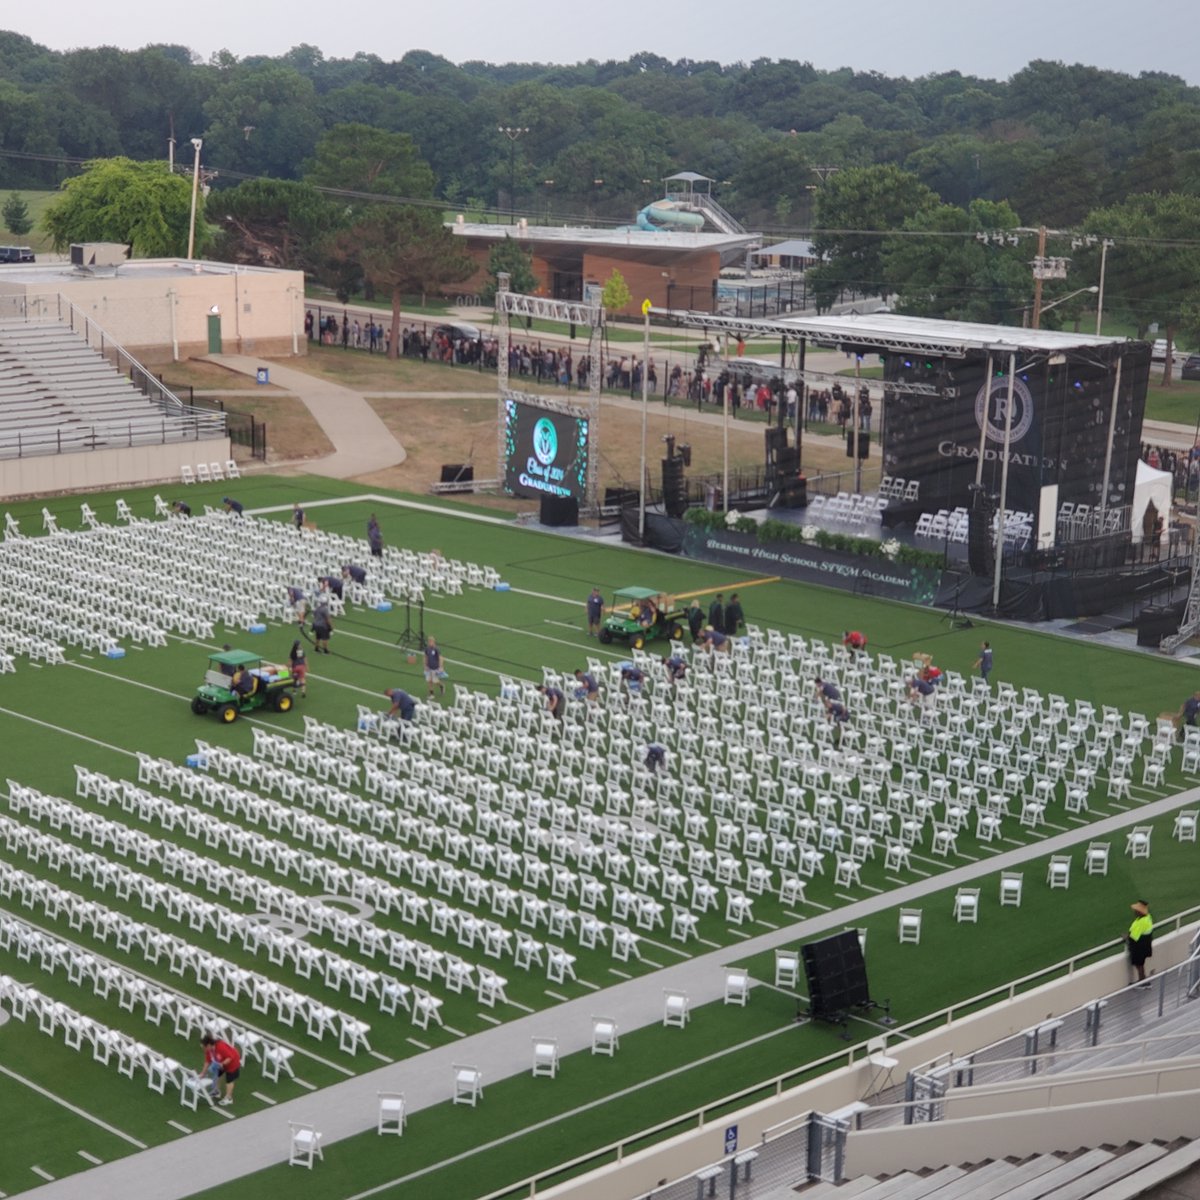 Due to weather, the Berkner HS graduation ceremony has been delayed until 8:30. Gates to tentatively open at 7:45 p.m.